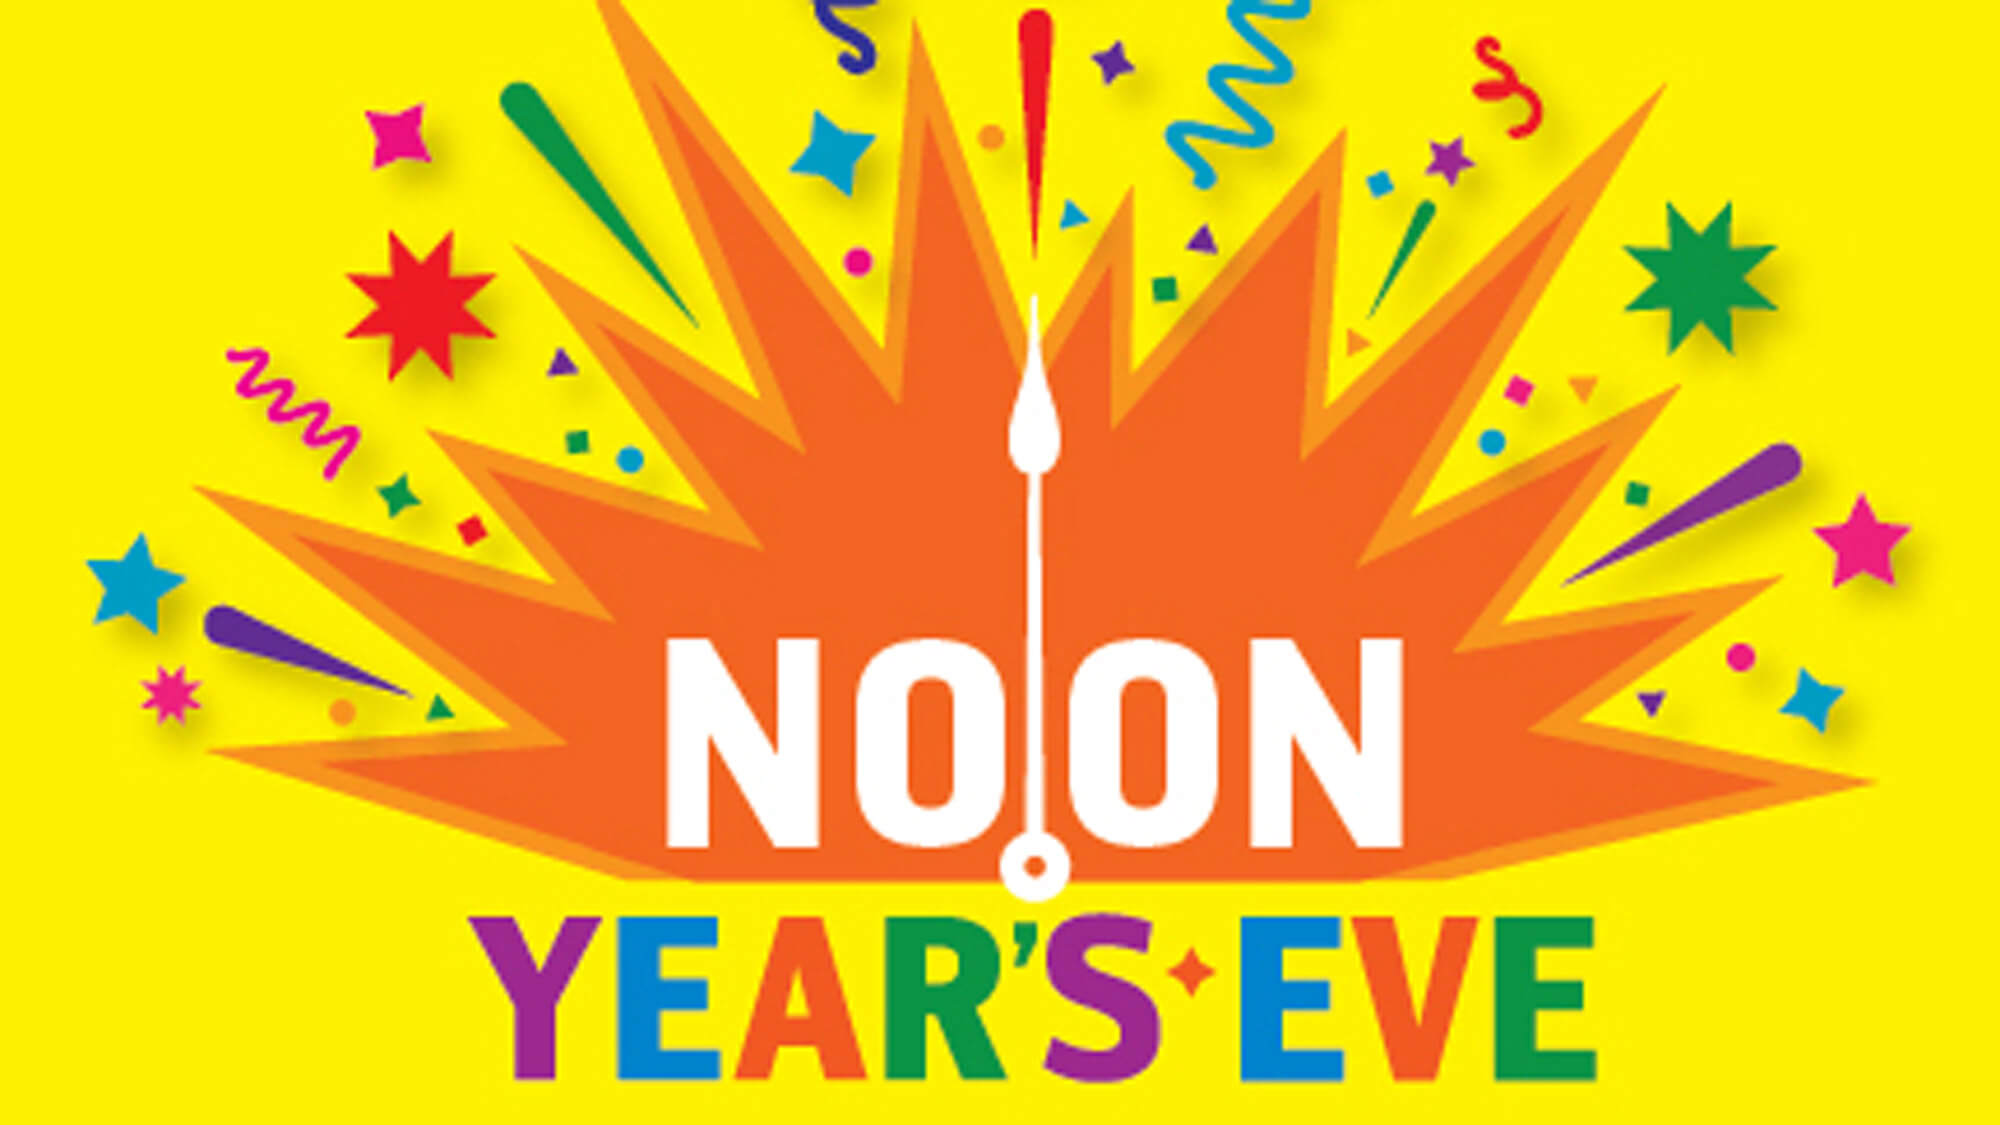 Noon Years Eve graphic